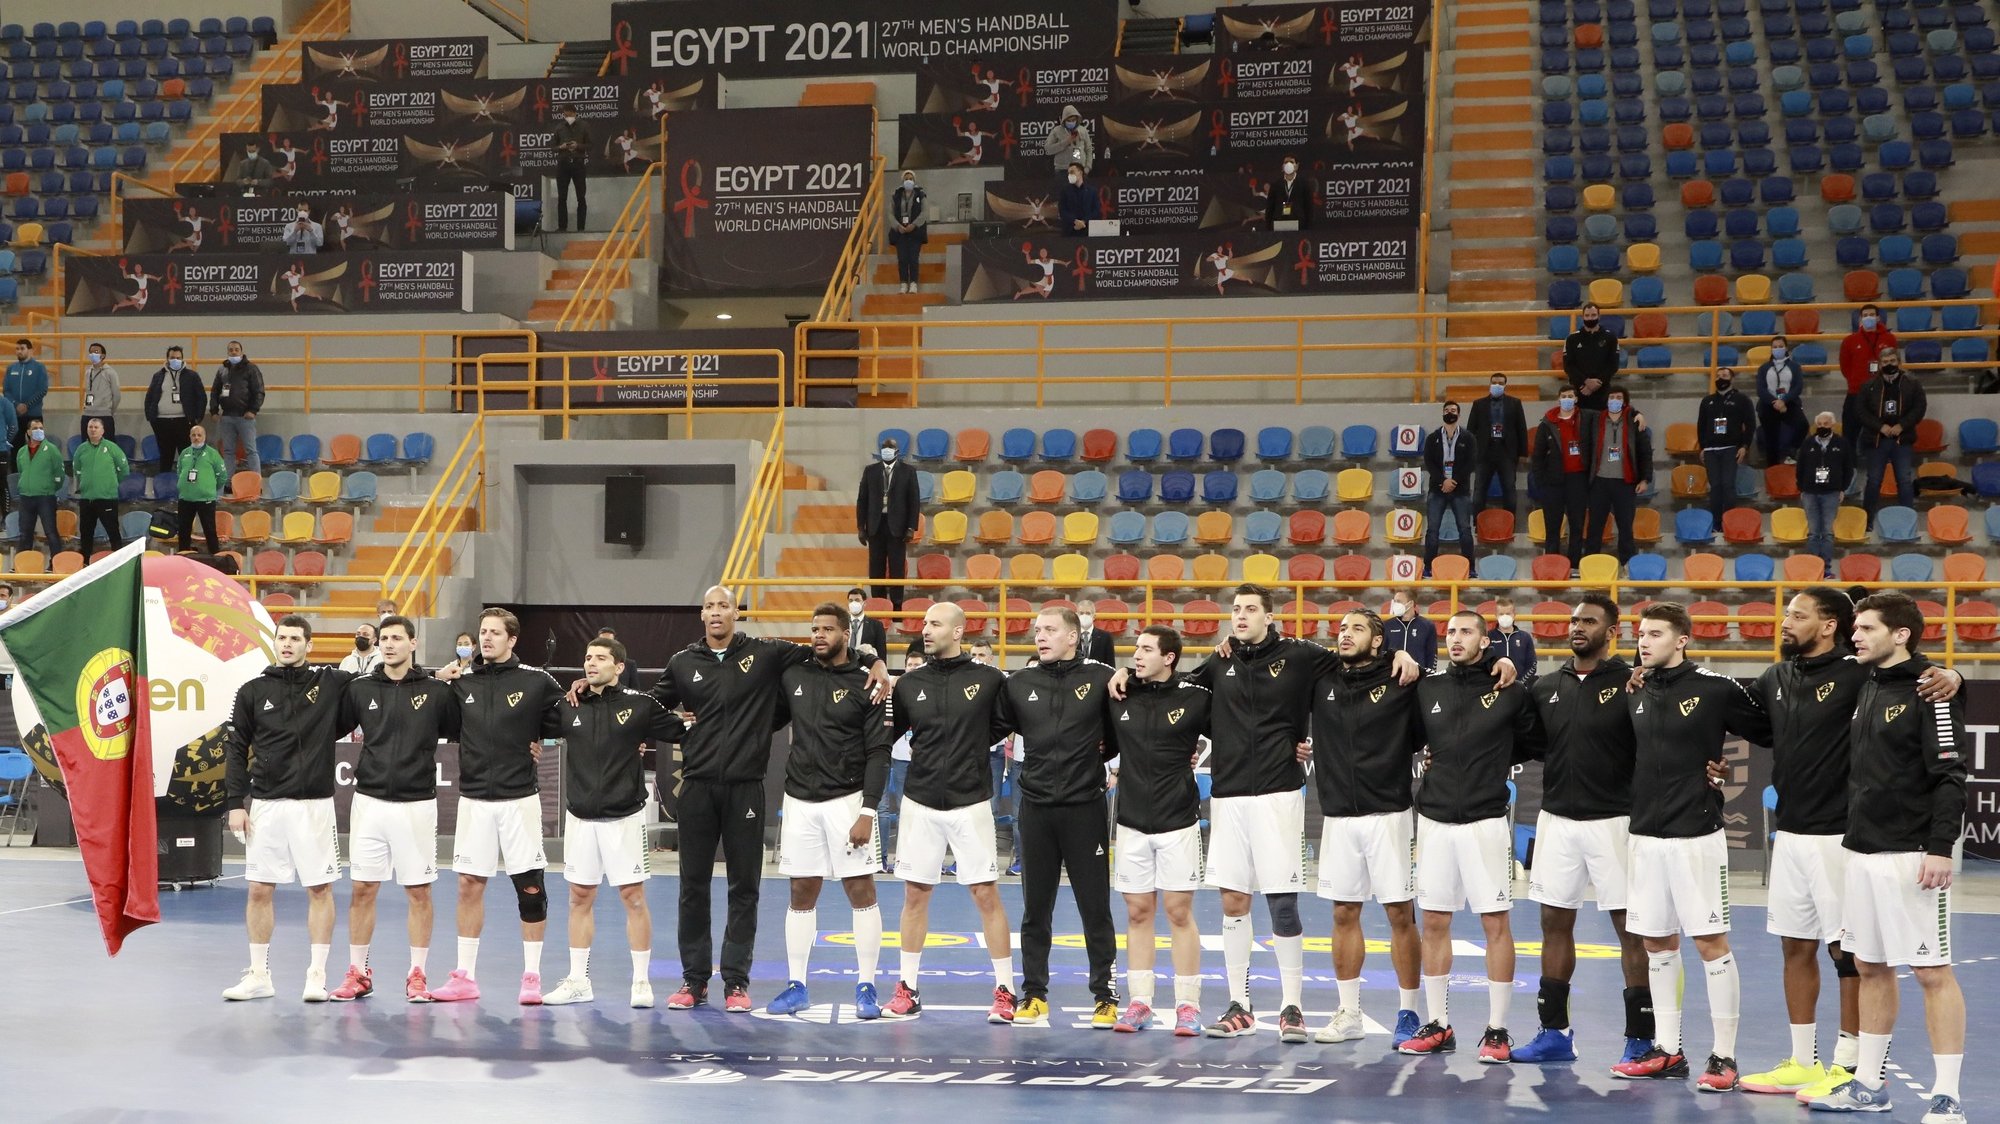 epa08946613 Portugal players line up prior to the match between Portugal and Algeria at the 27th Men&#039;s Handball World Championship in Cairo, Egypt, 18 January 2021.  EPA/Khaled Elfiqi / POOL